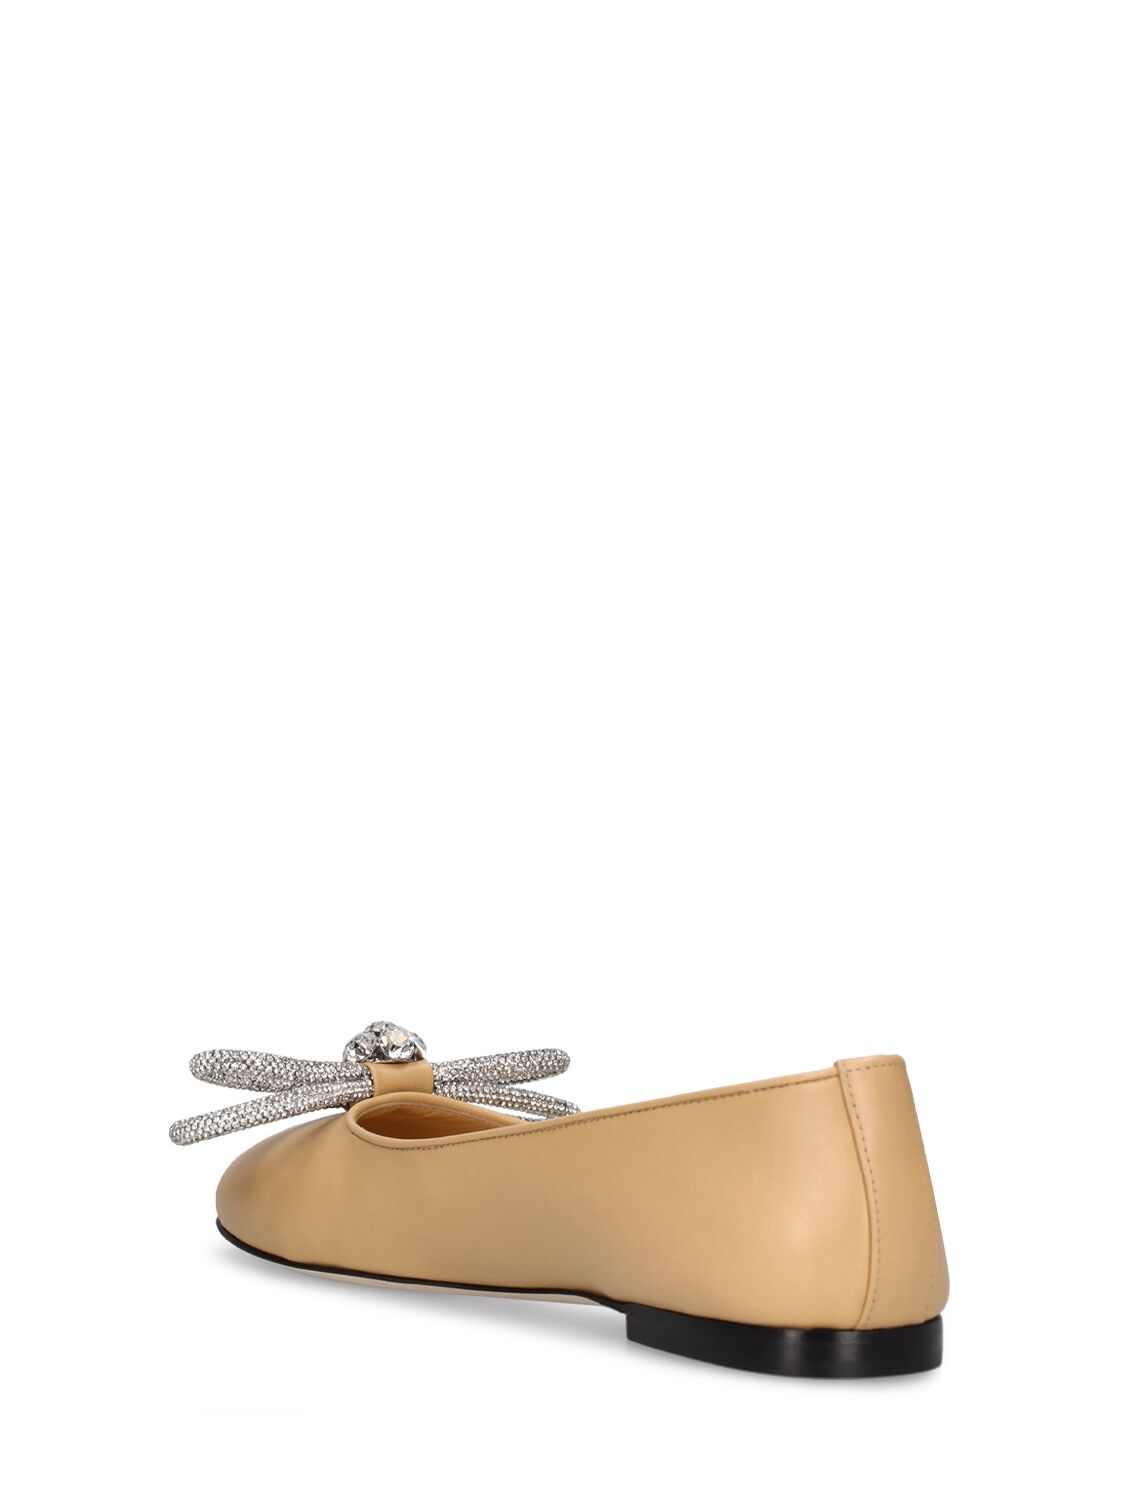 Shop Mach & Mach 10mm Double Bow Leather Ballerina Flats In Nude